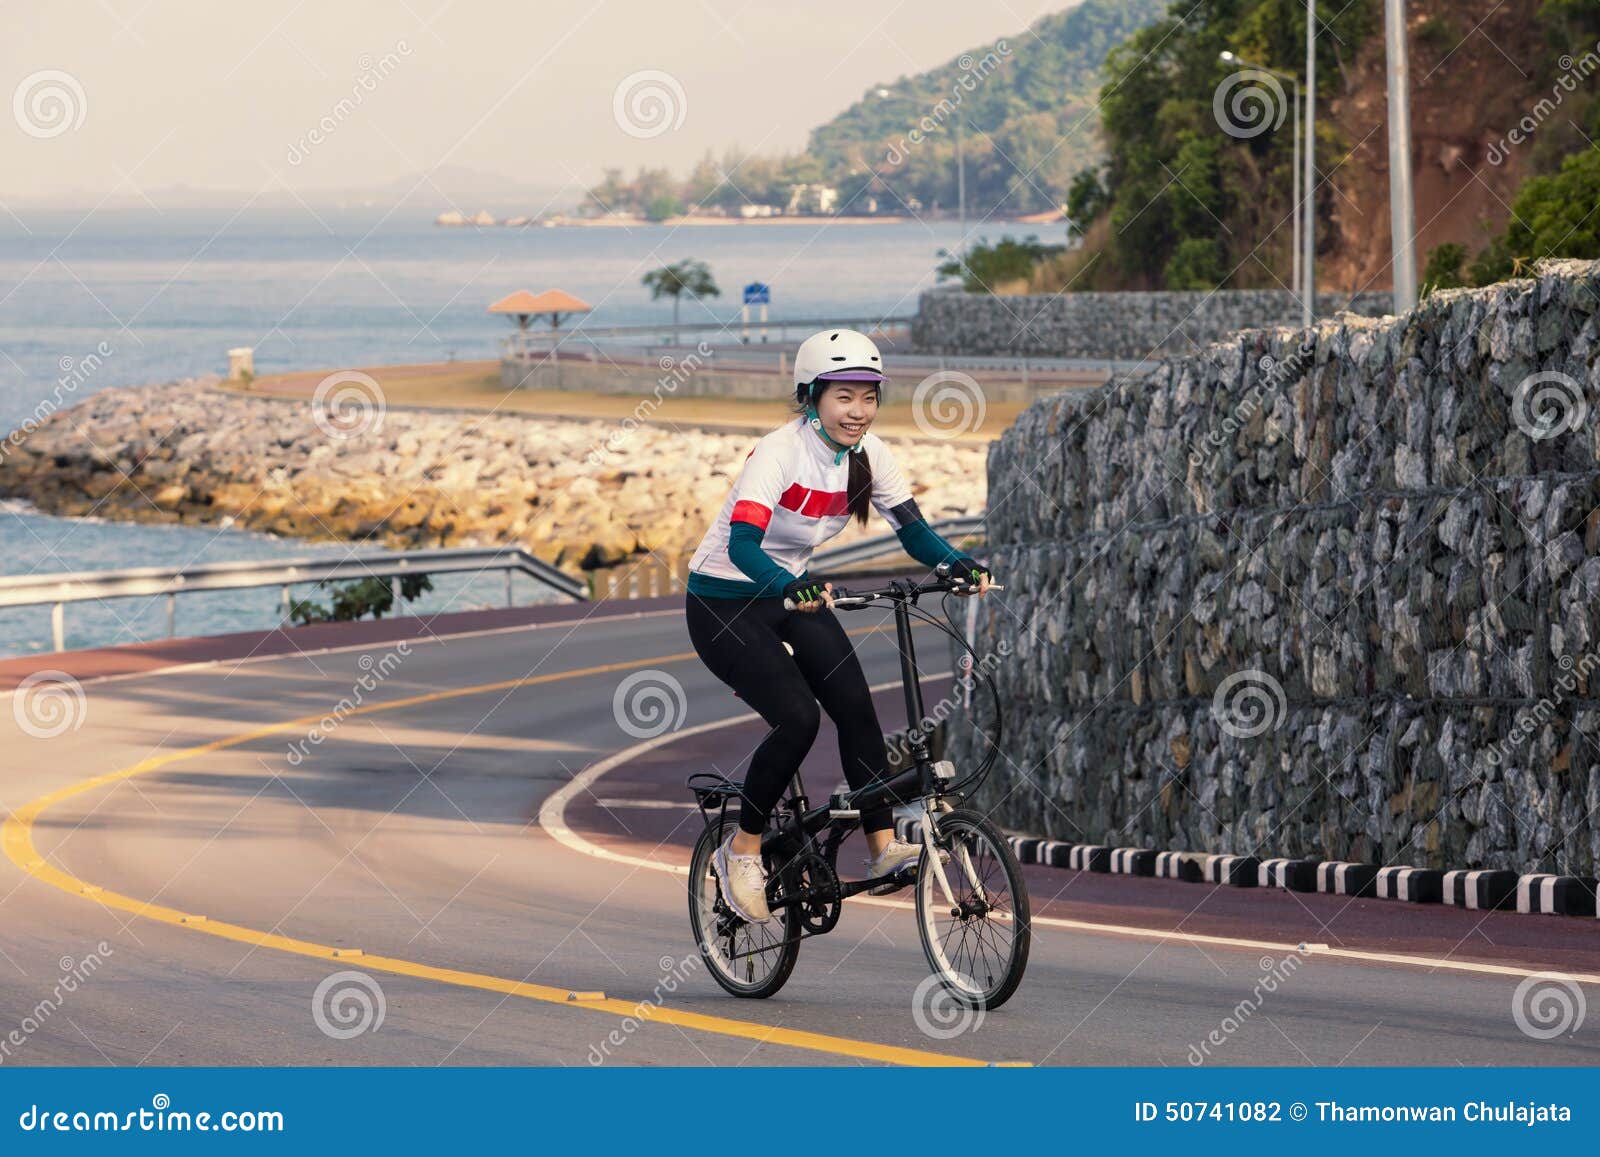 The Girl Cycling Uphill On The Road Stock Photo Image 50741082 throughout Cycling Uphill